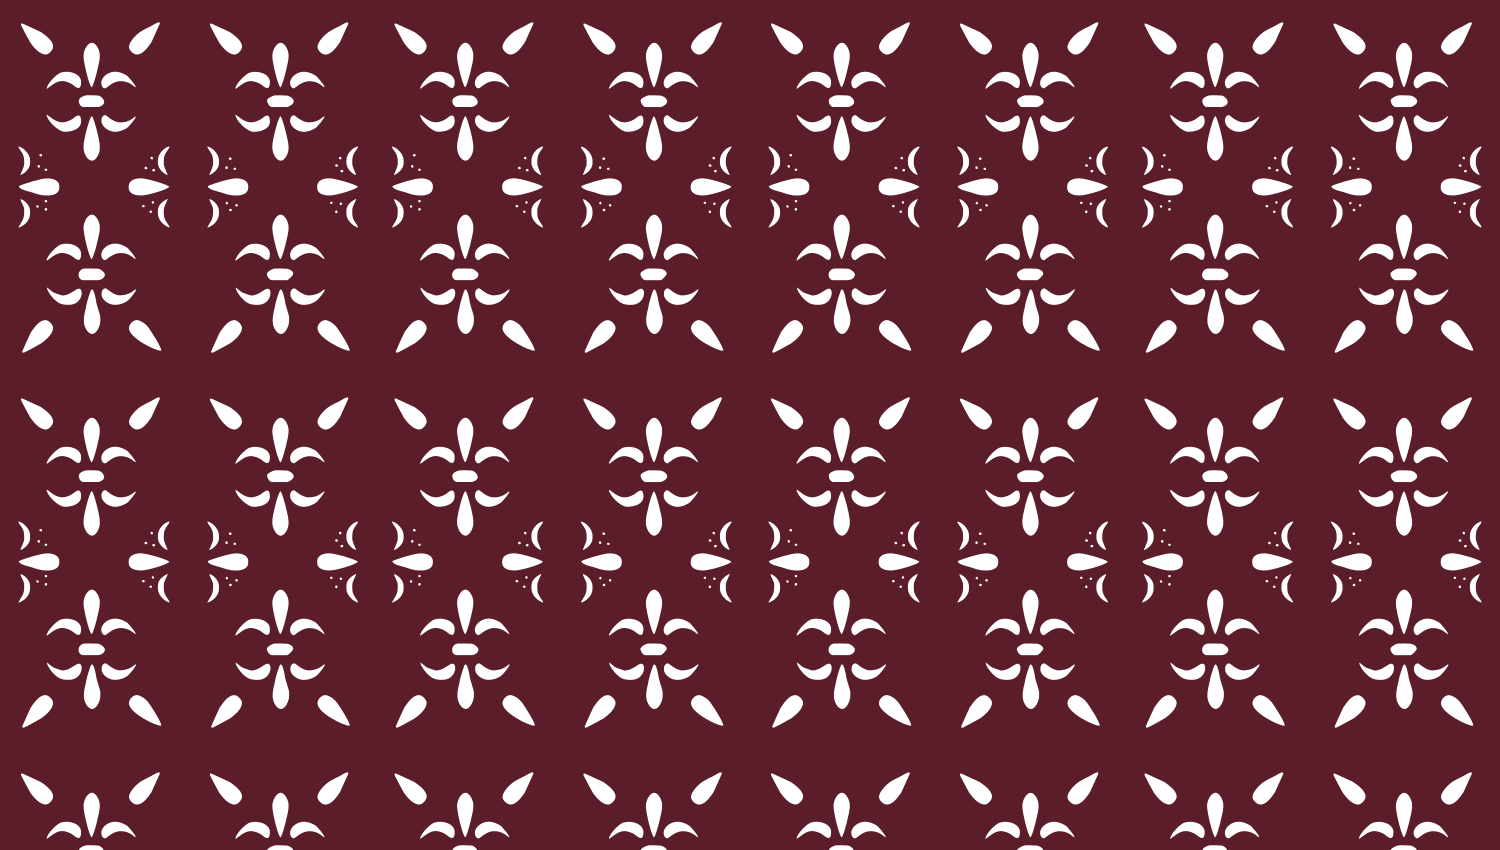 Parasoleil™ Grand Fleur© pattern displayed with a burgundy color overlay